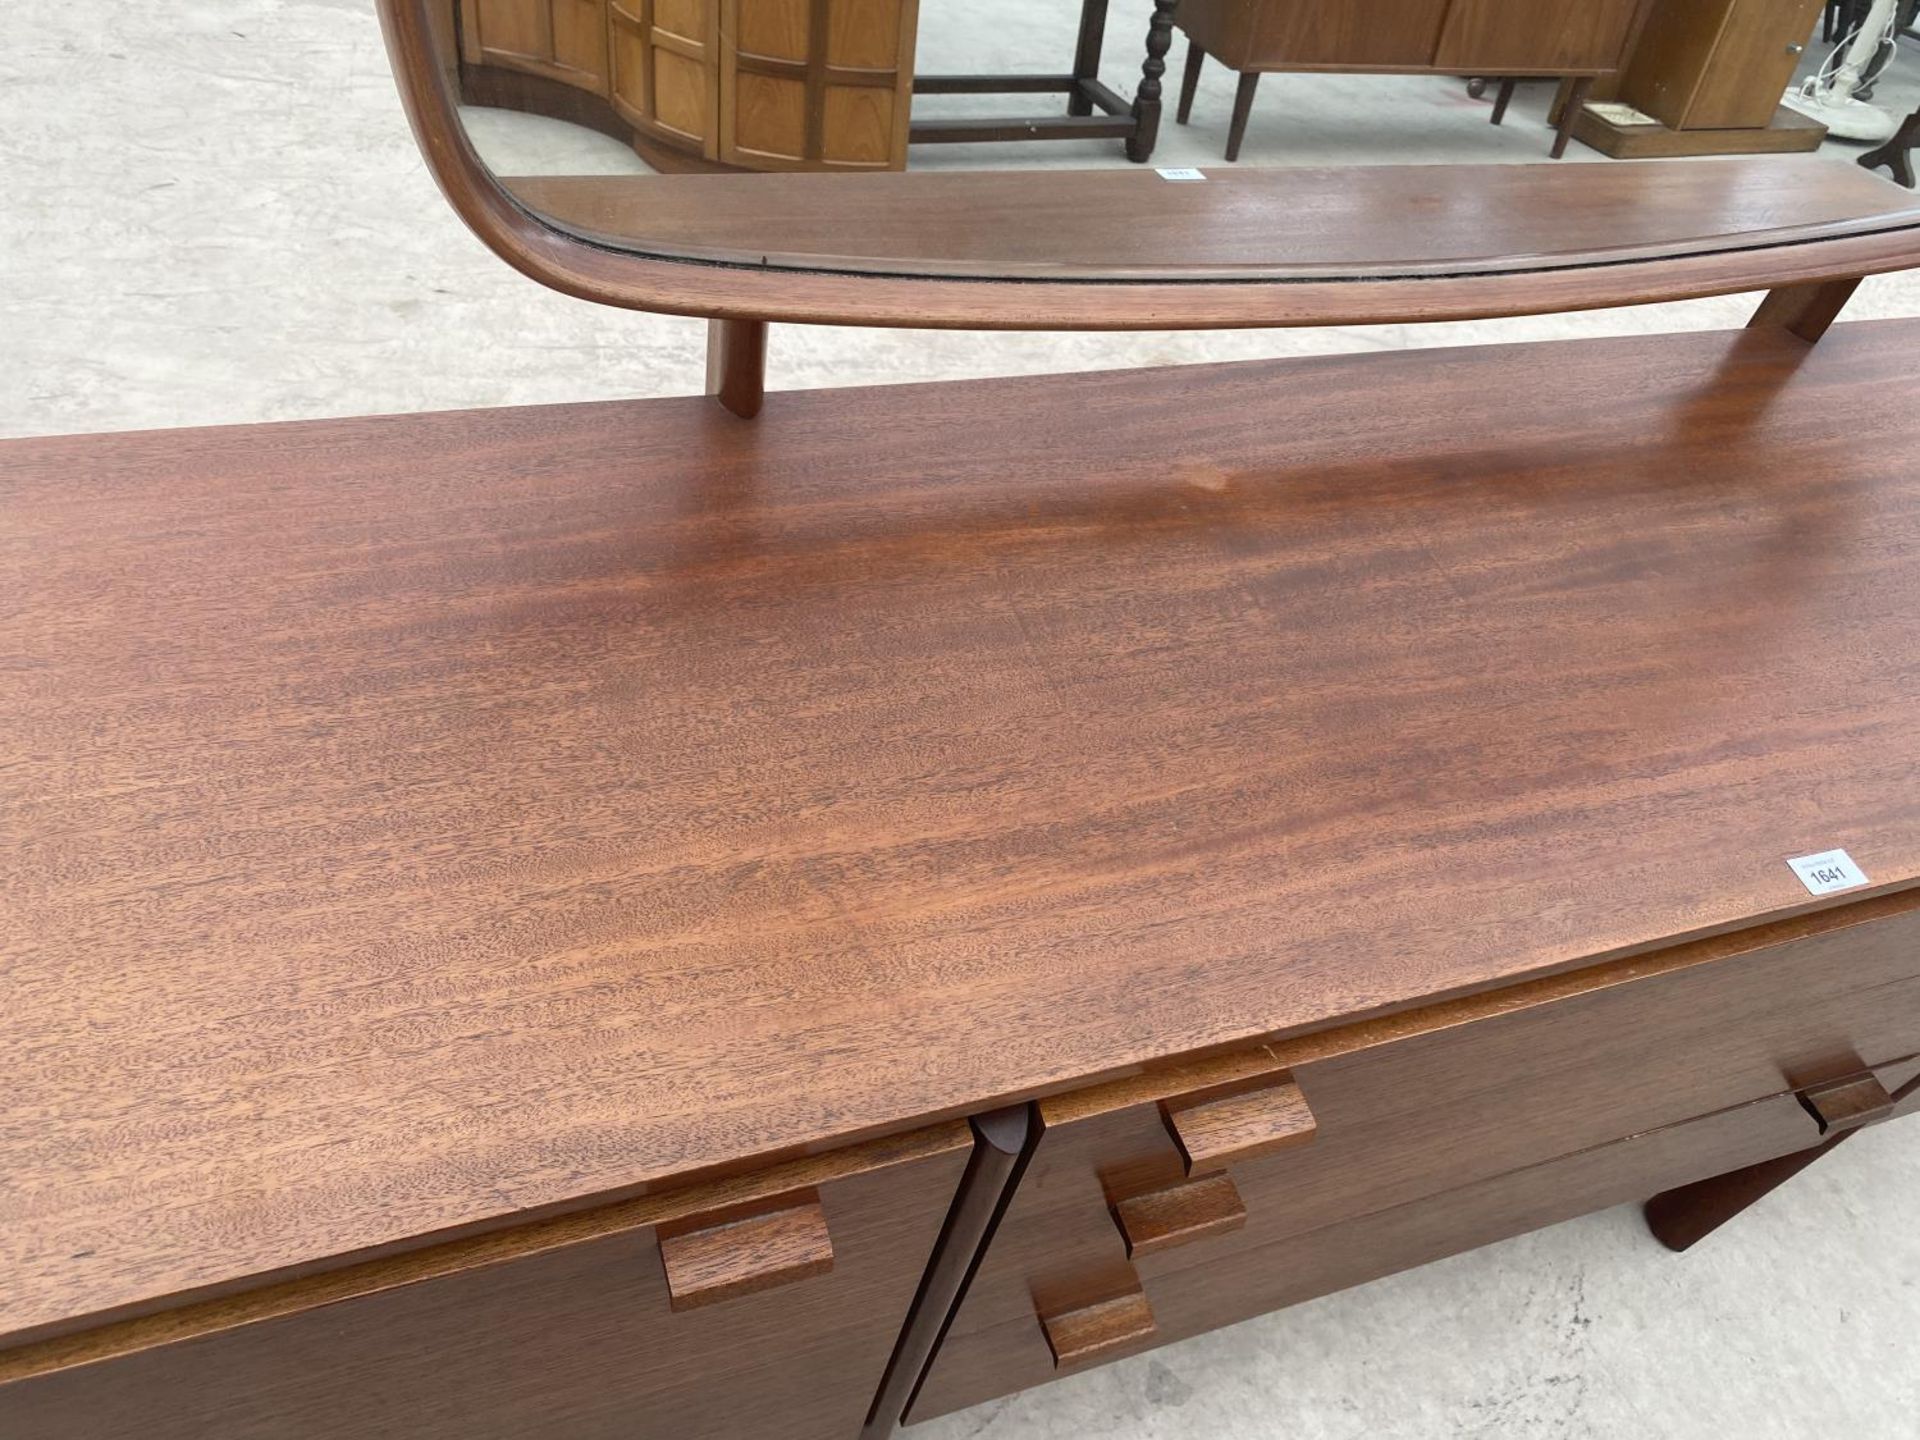 A TEAK DRESSING TABLE WITH TWO DOORS, THREE DRAWERS AND UPPER MIRROR - Image 3 of 5